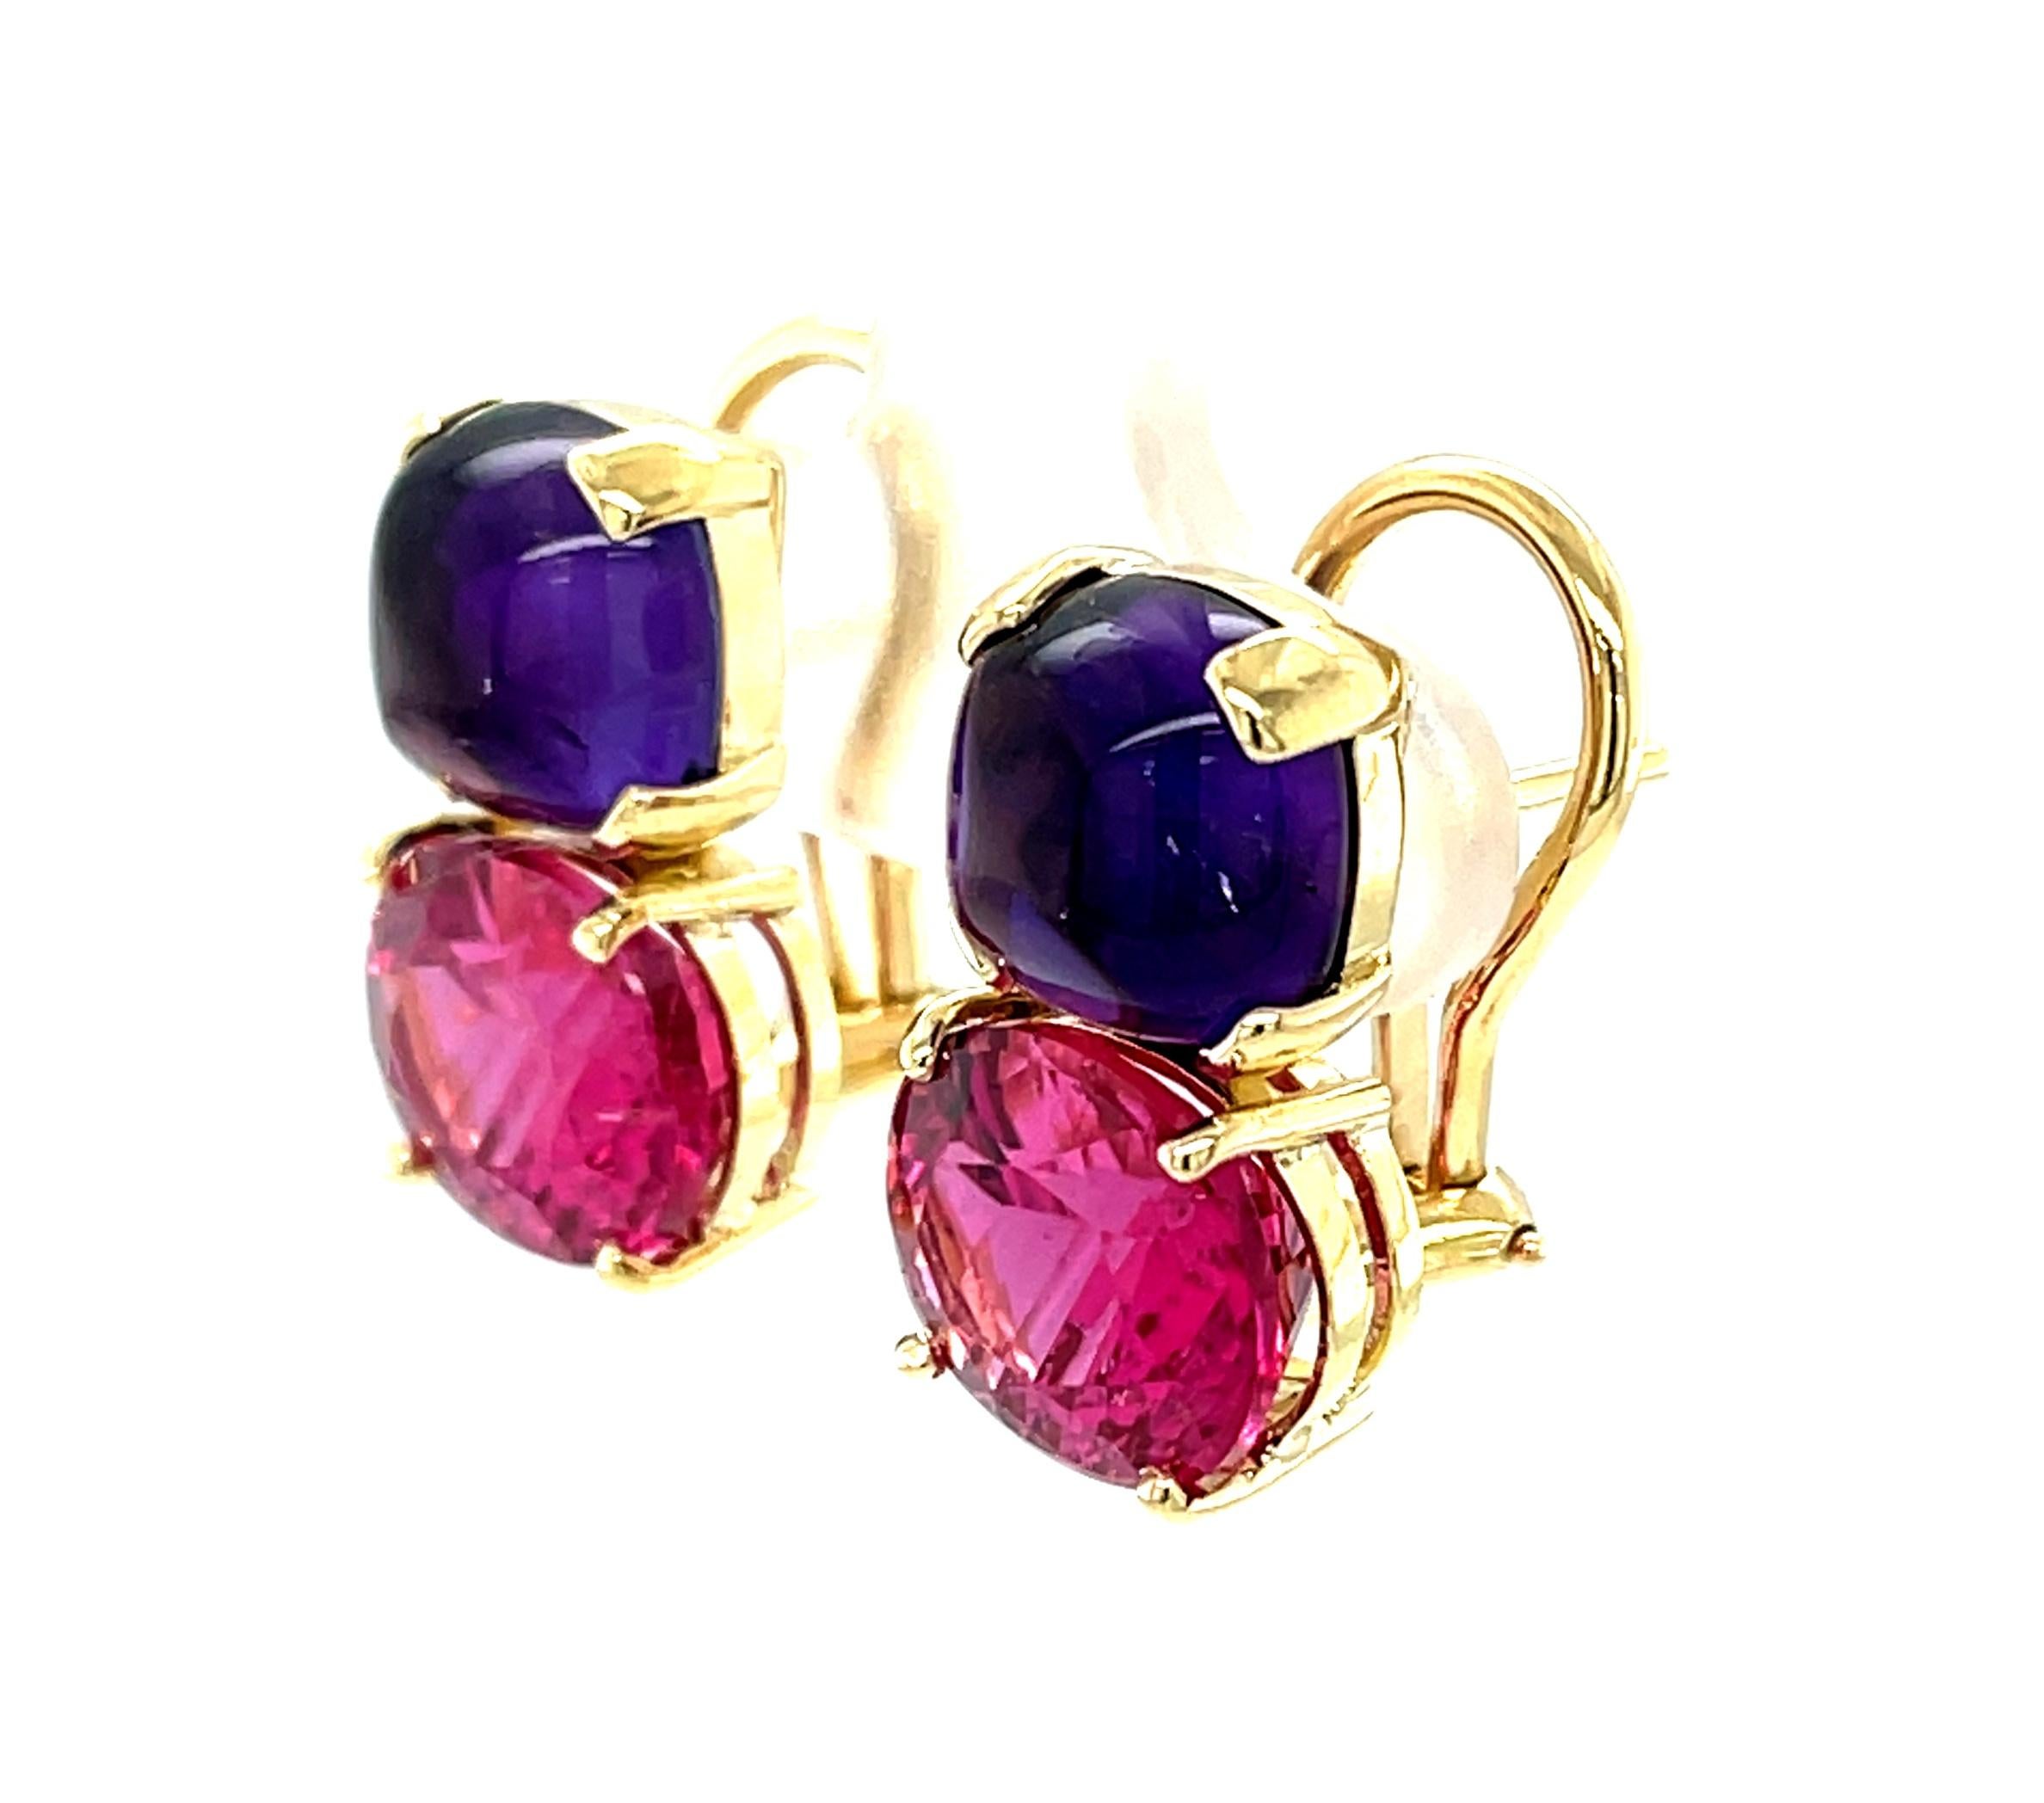 Amethyst Cabochon and Rubellite Tourmaline Earrings in 18k Yellow Gold For Sale 2